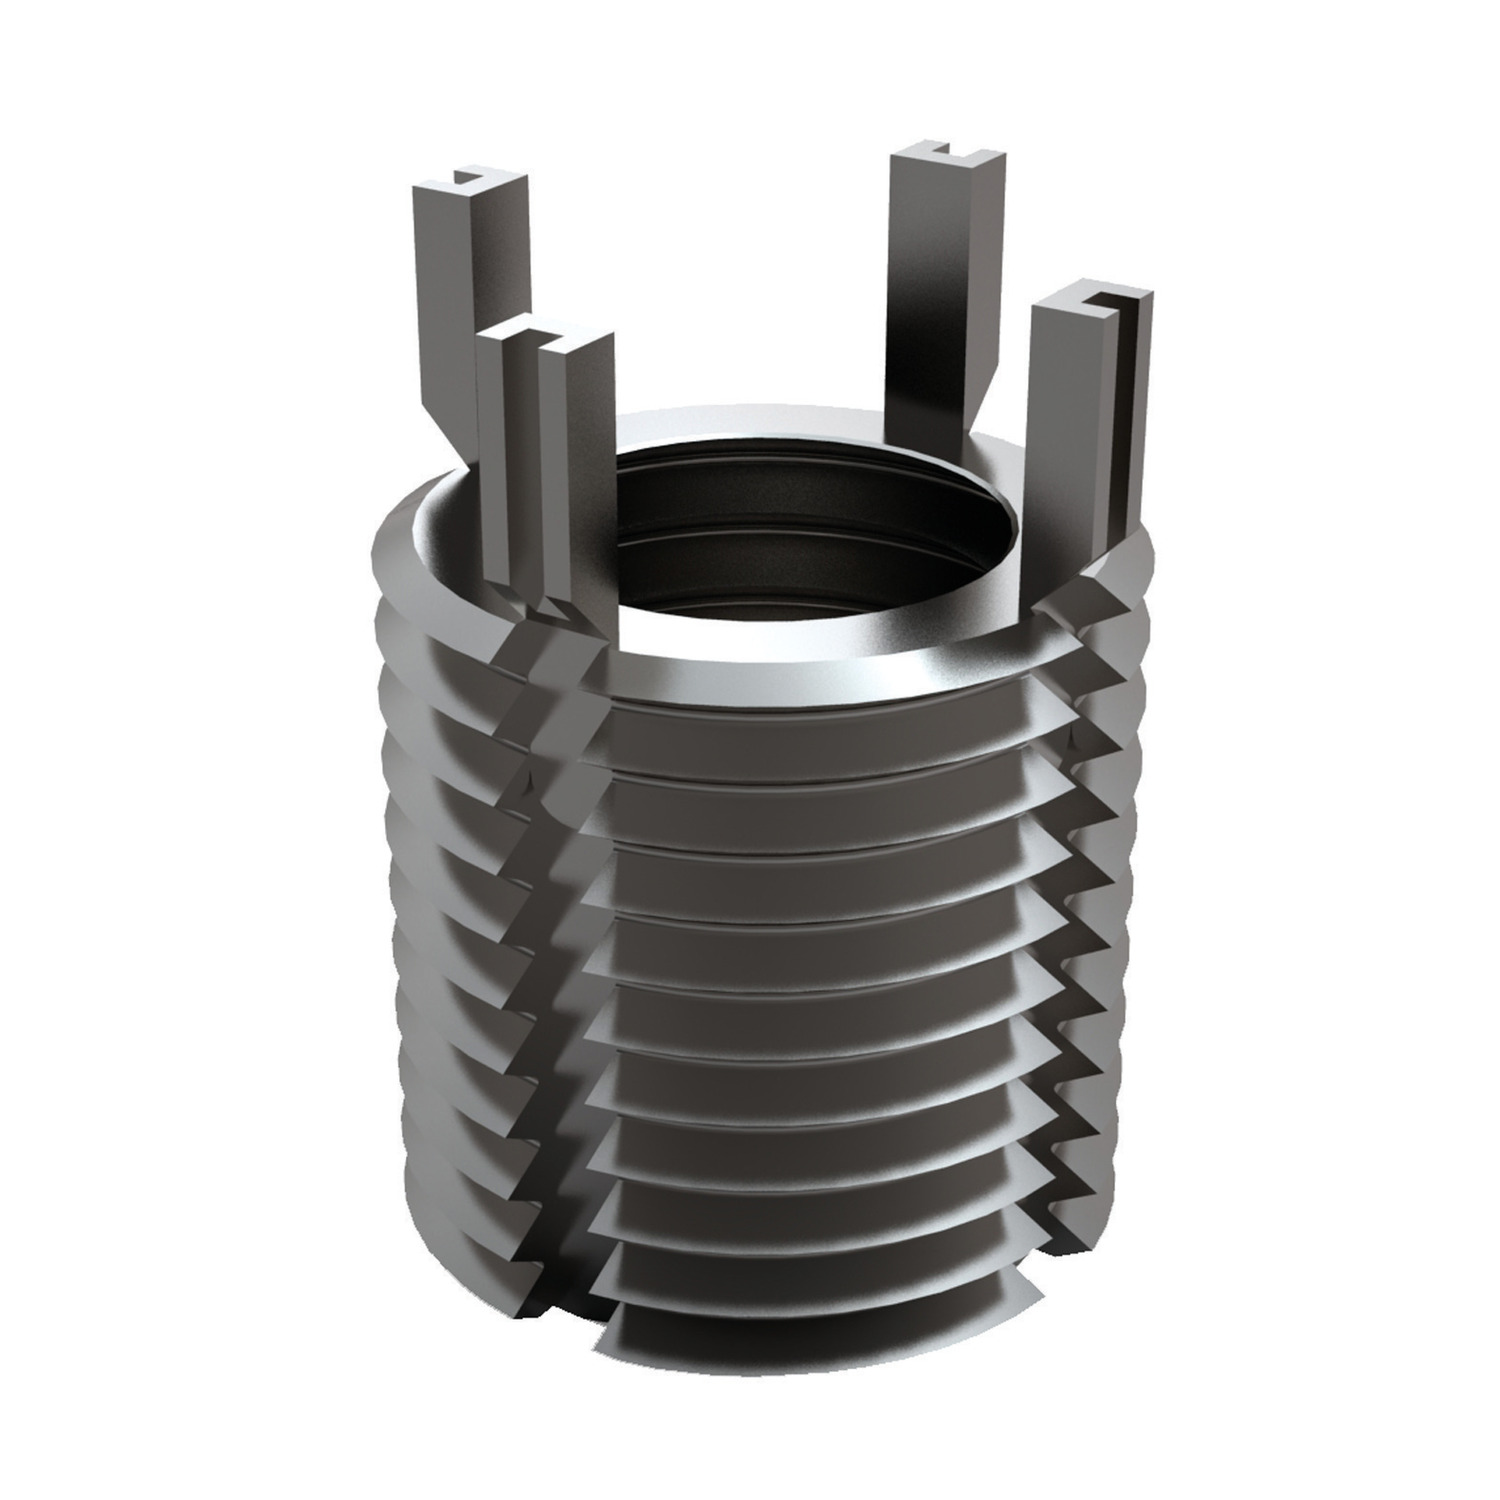 Product 22002, Threaded Insert - Metric heavy duty - stainless steel / 